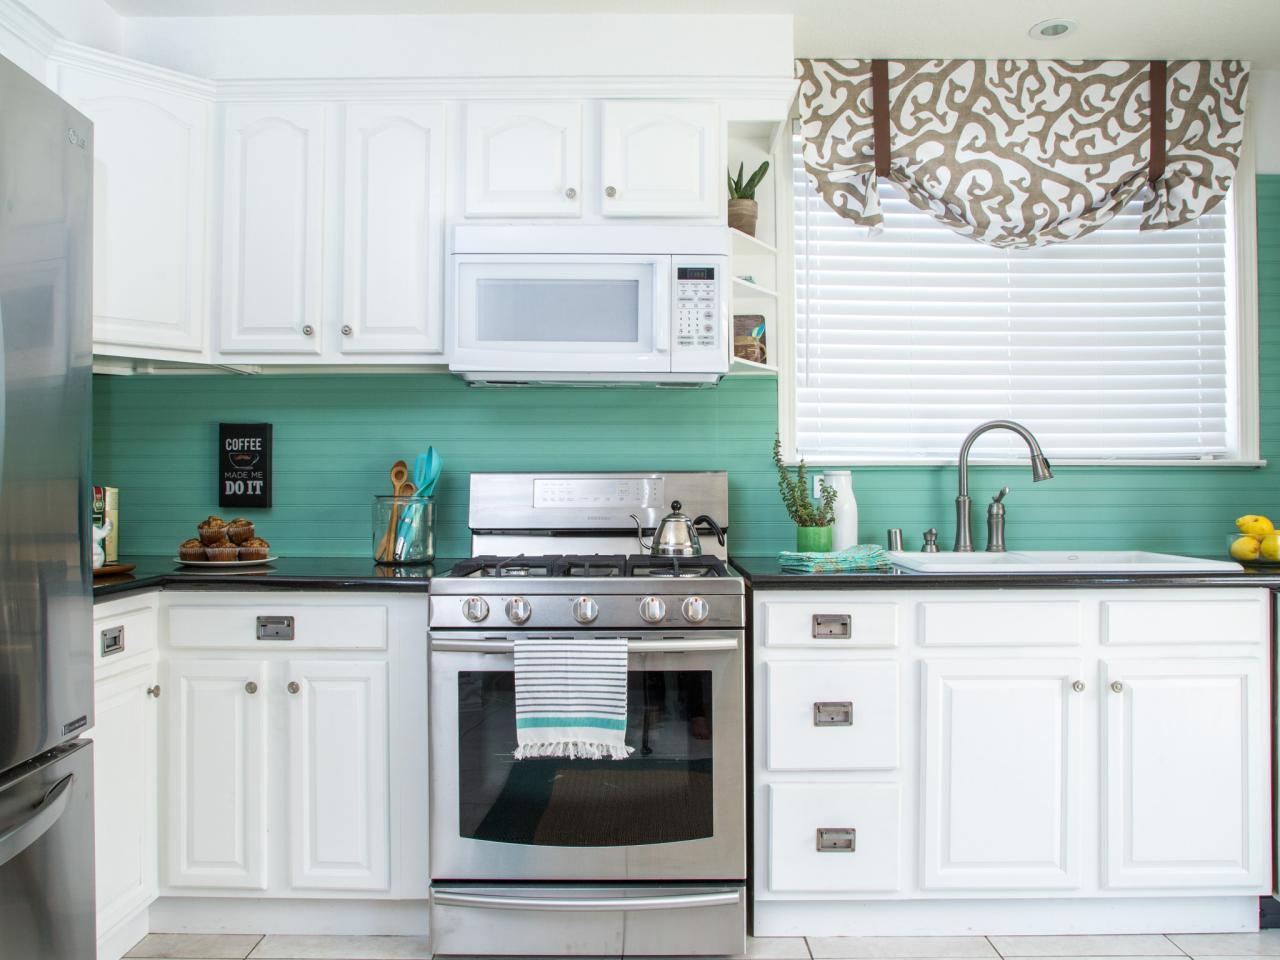 How To Cover An Old Tile Backsplash With Beadboard How Tos Diy